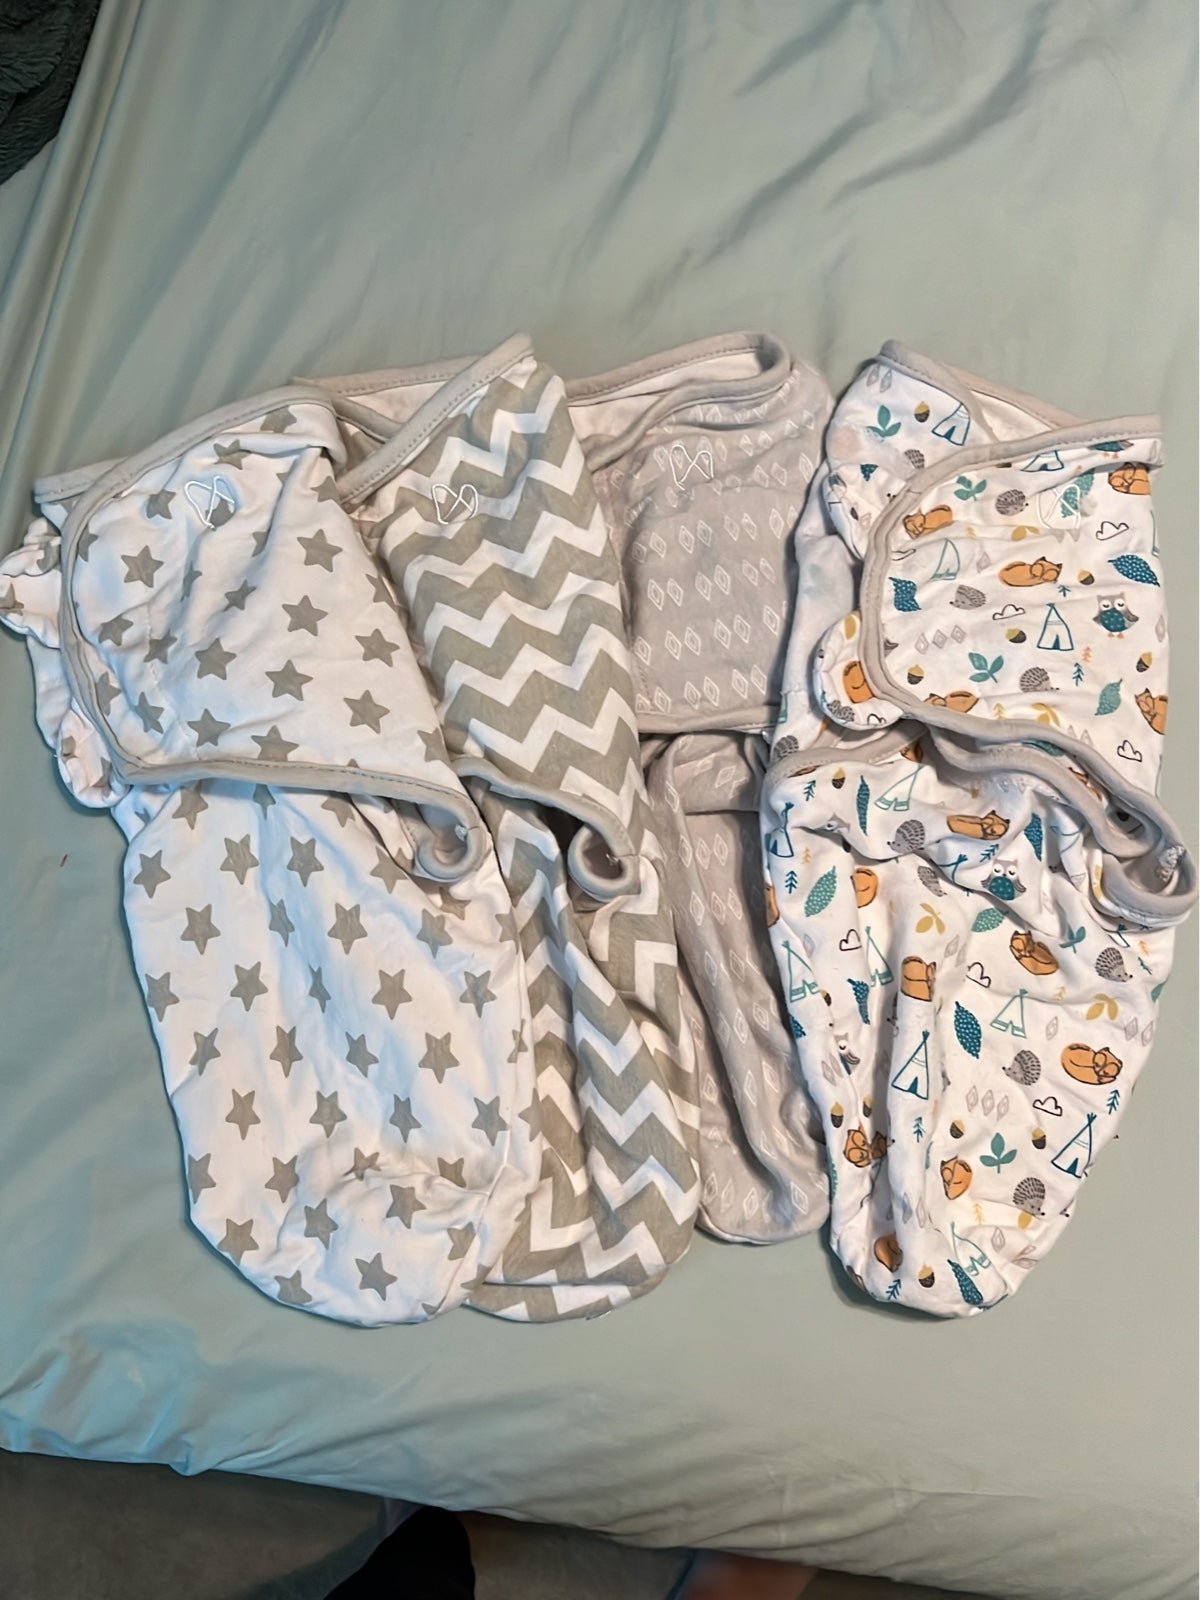 SwaddleMe Swaddles Size Small/Medium Lot of 4 Evc6G3t0Y